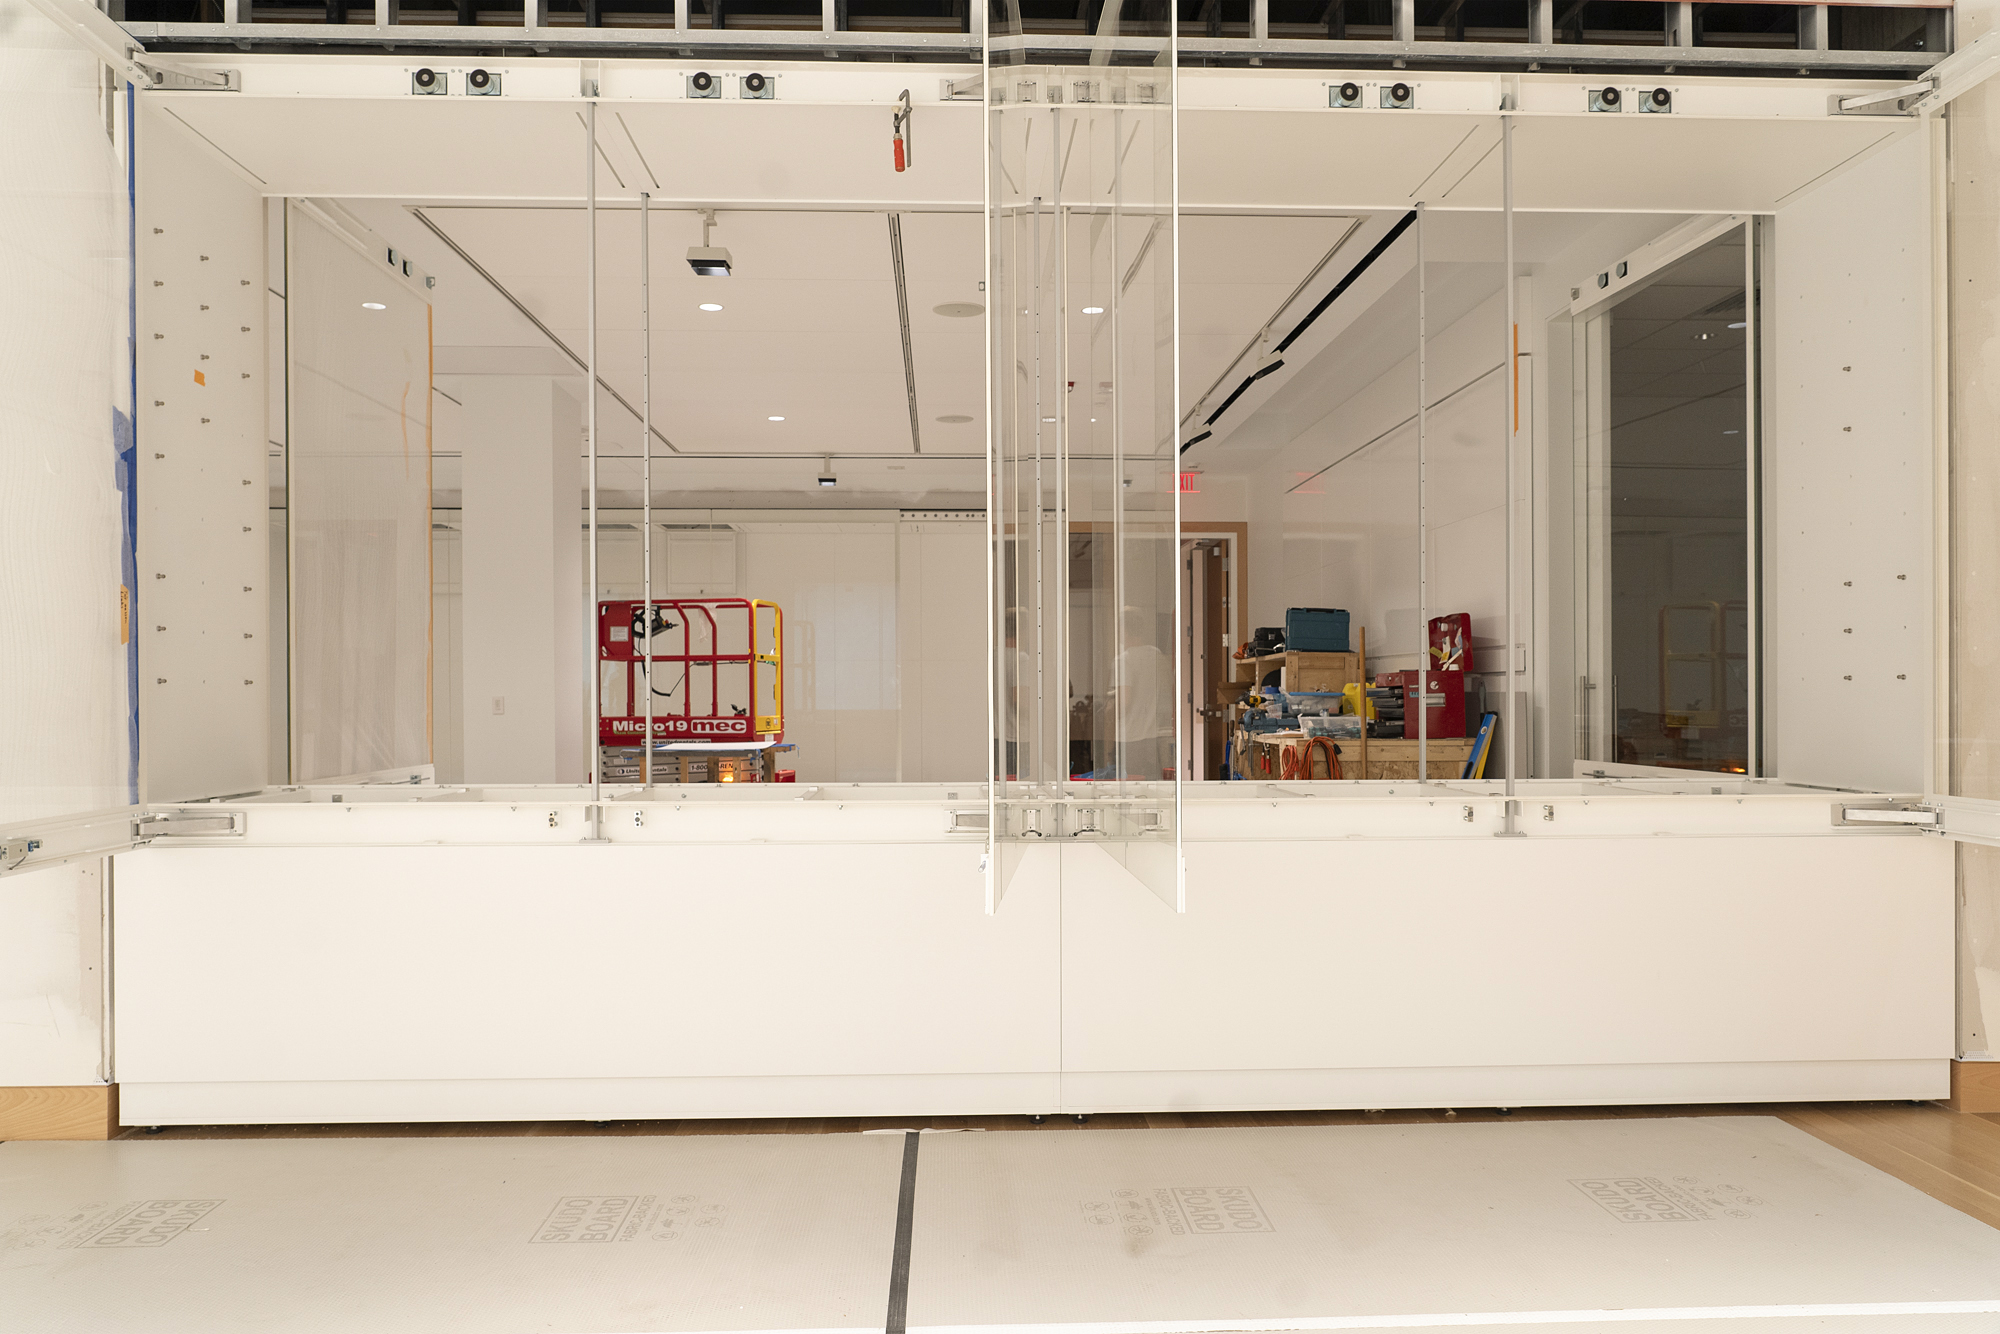 A wall of open glass cases in a bright white room